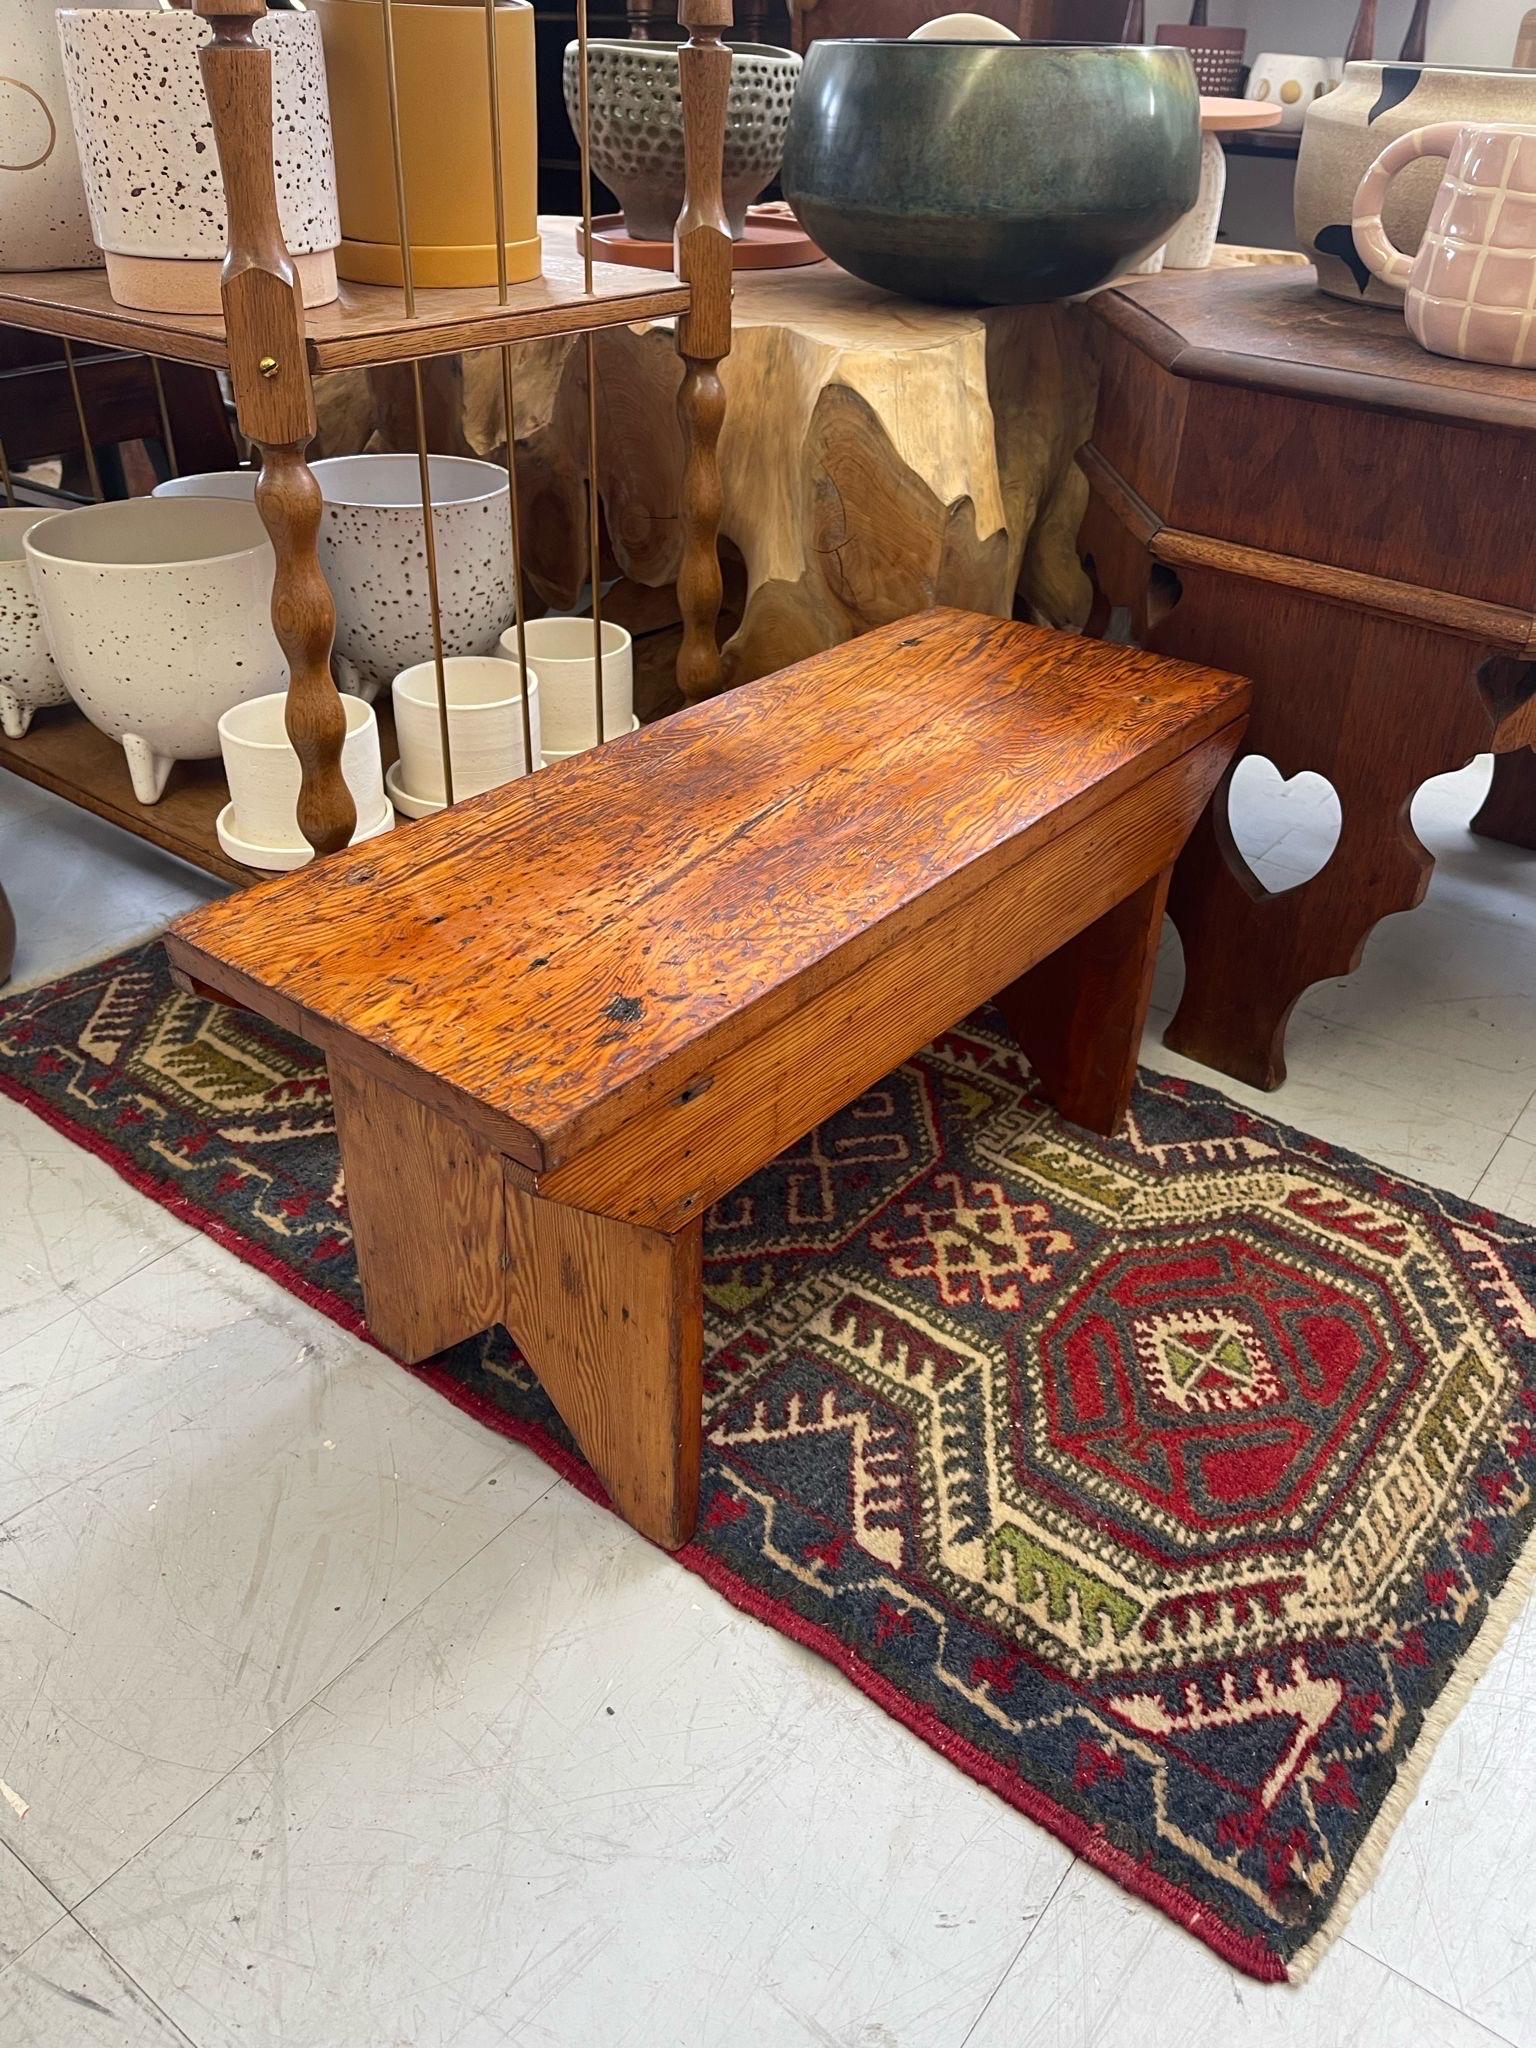 Striking wood tone, possibly made from oak. This Bench could also be used as foot stool. Vintage Condition Consistent with Age as Pictured.

Dimensions. 24 W ; 9 D ; 12 H